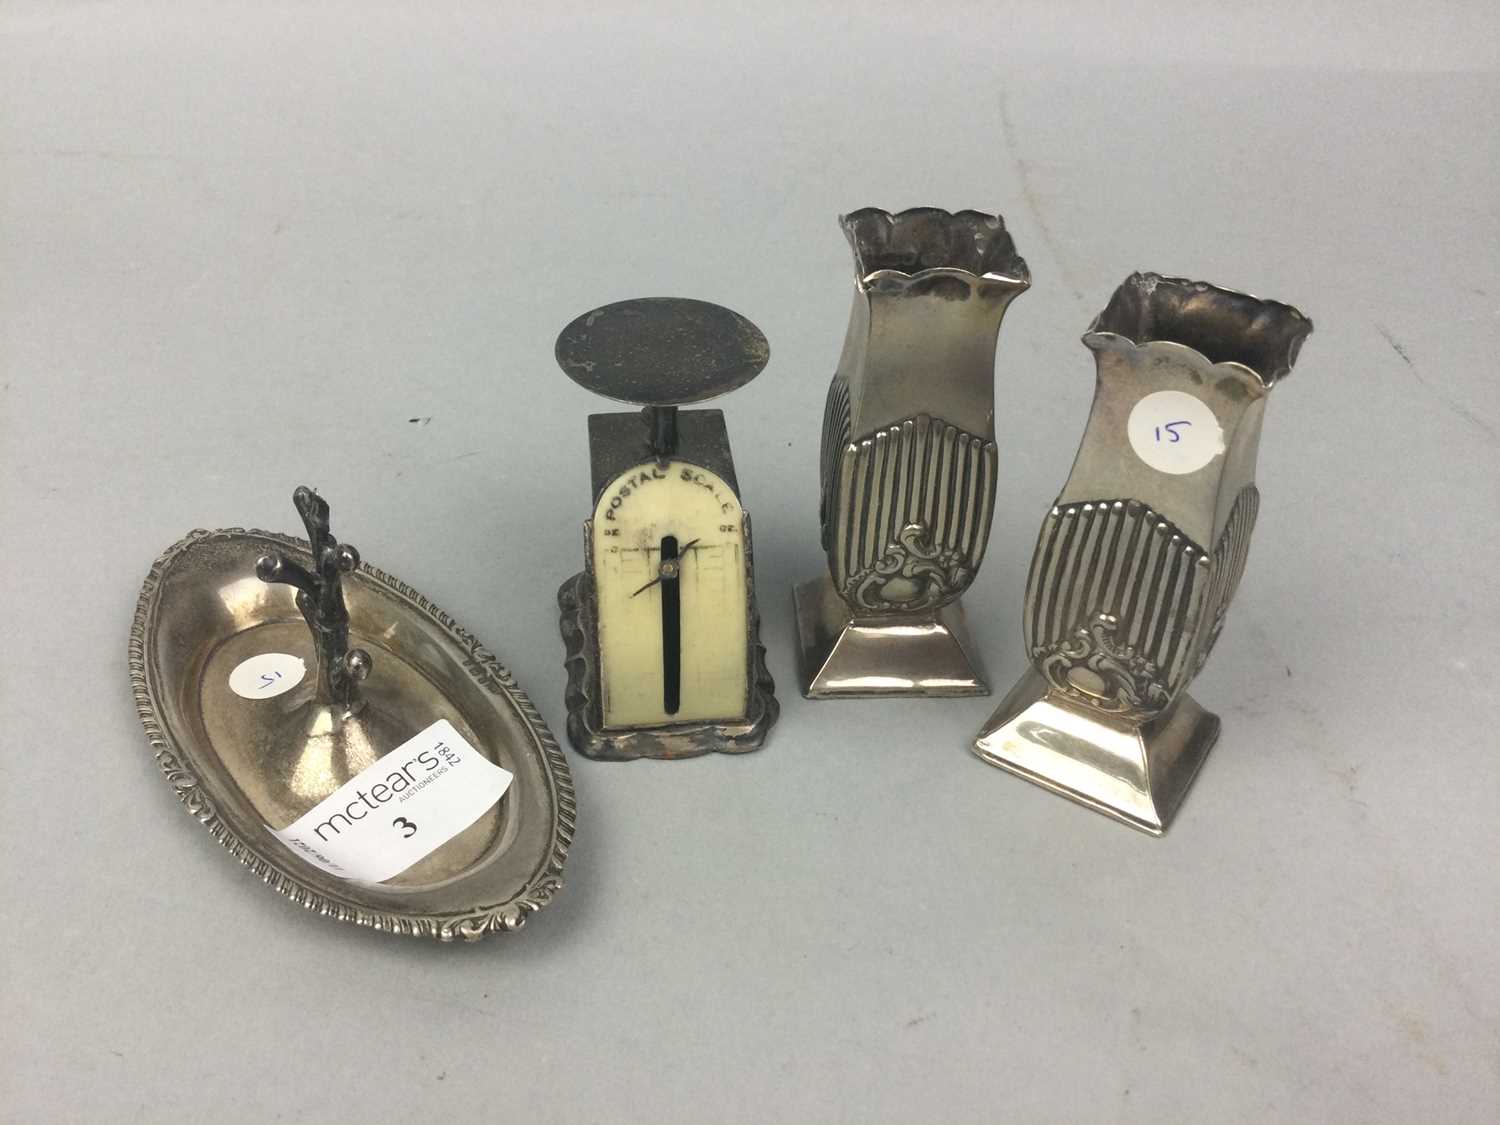 Lot 3 - A SET OF SILVER MINIATURE POSTAL SCALES AND OTHER ITEMS